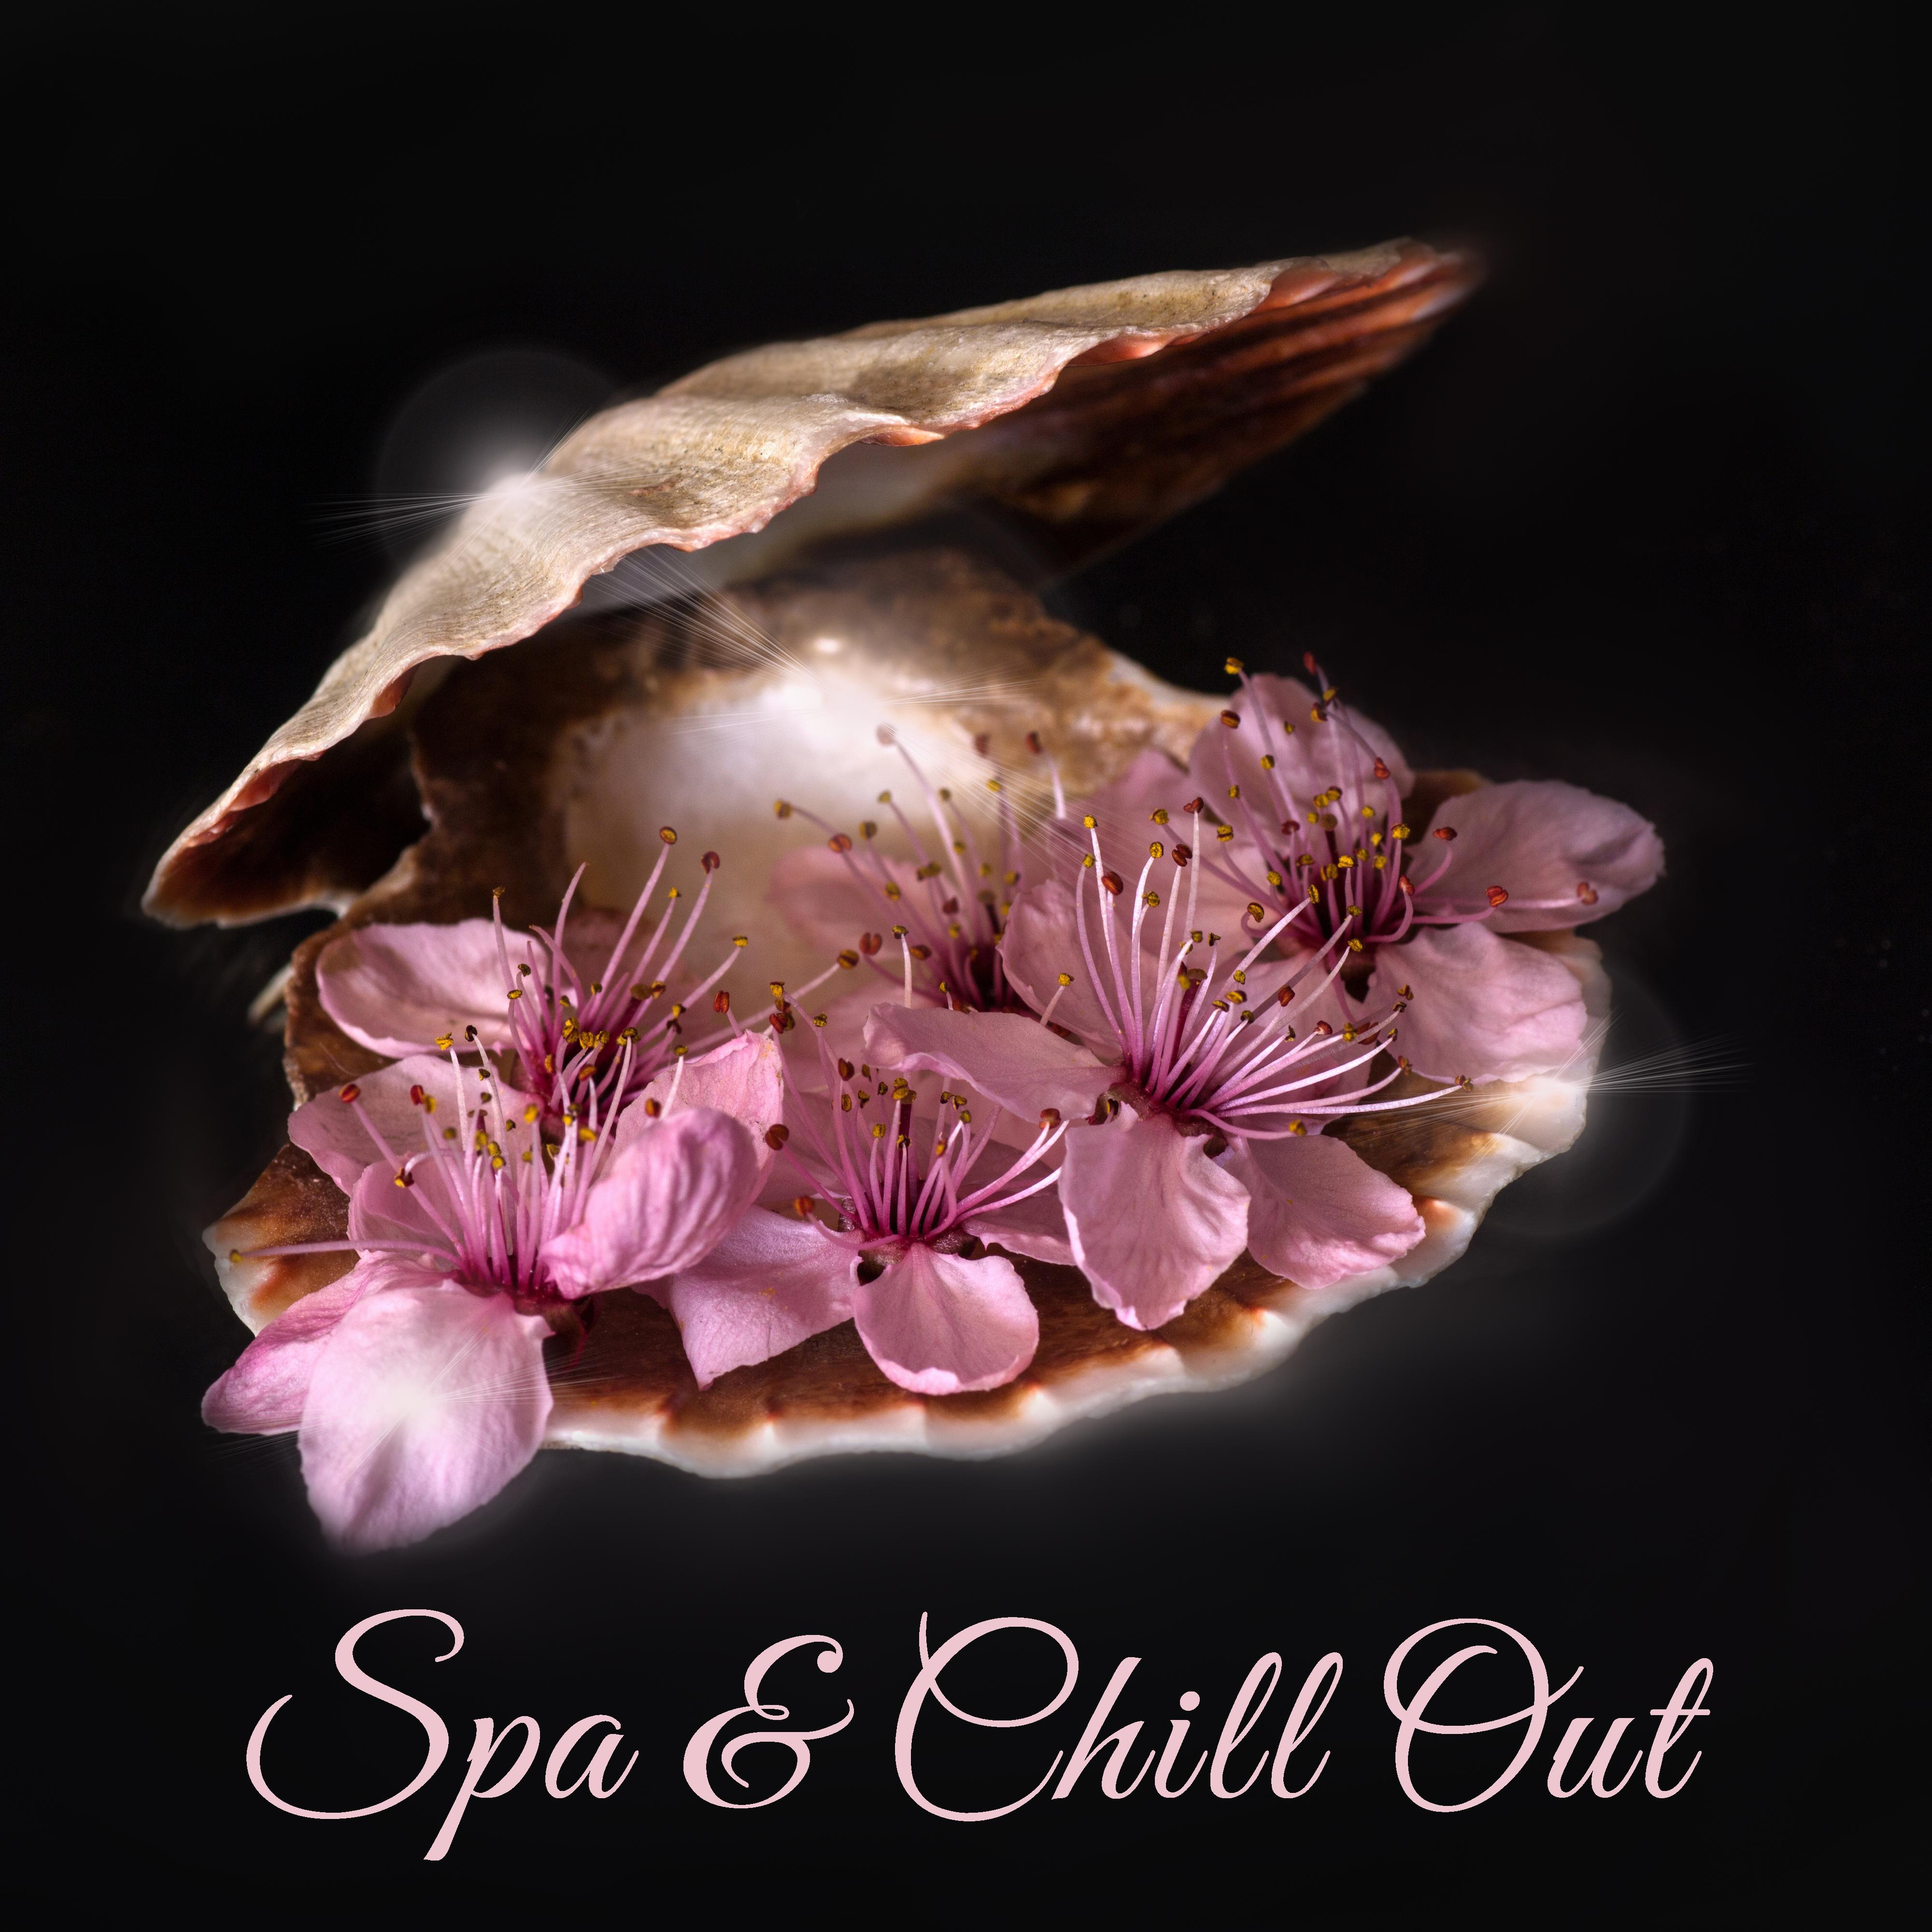 Spa & Chill Out – Summer Vibes, Chill Out Music, Relaxation, Spa Music, Rest